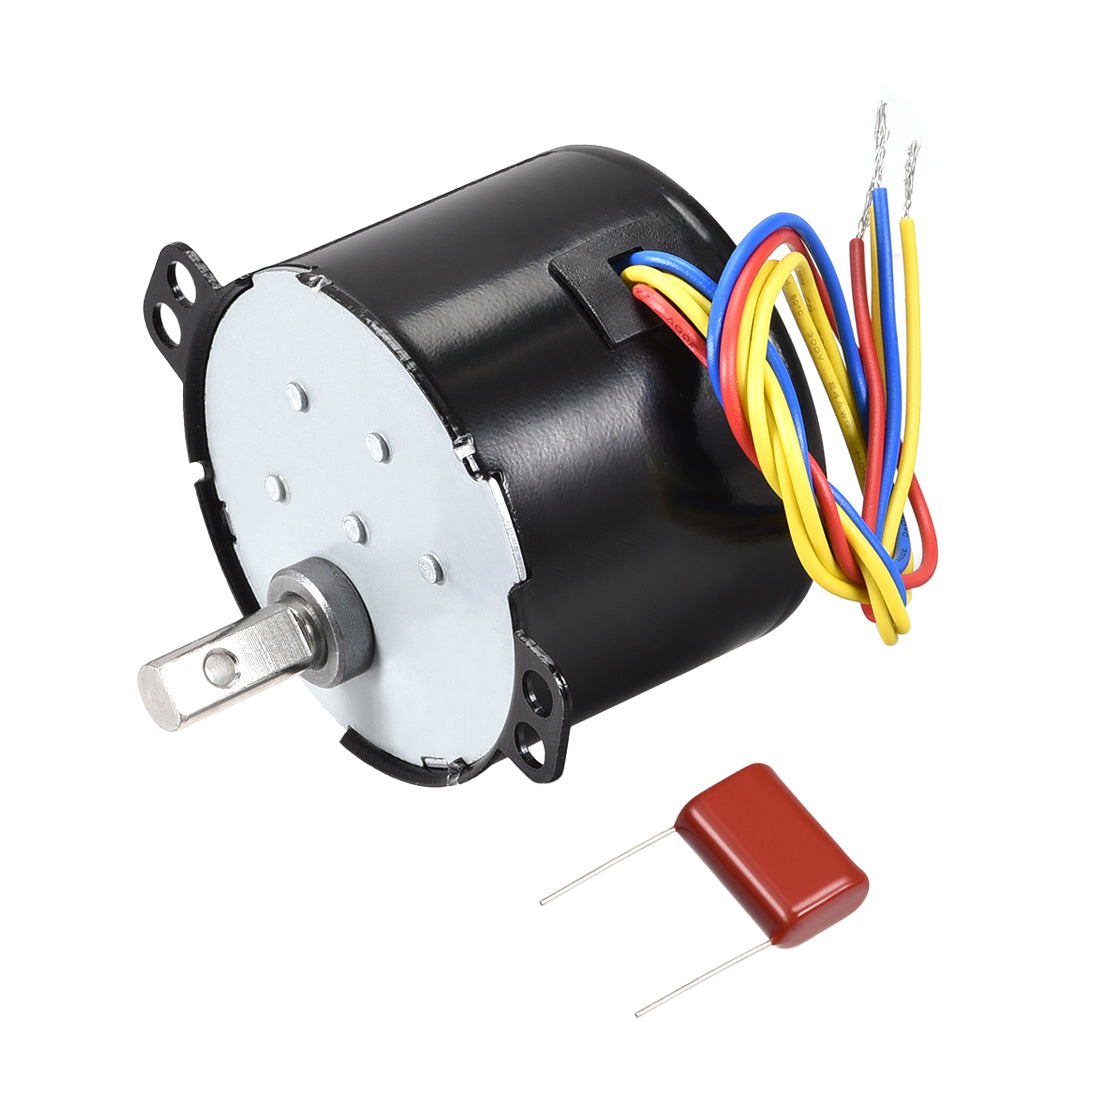 uxcell Uxcell AC 220V Electric Synchronous Motor Plastic Gear Turntable /C 5RPM 50-60HZ 6W 7mm Dia Eccentric Shaft with Hole